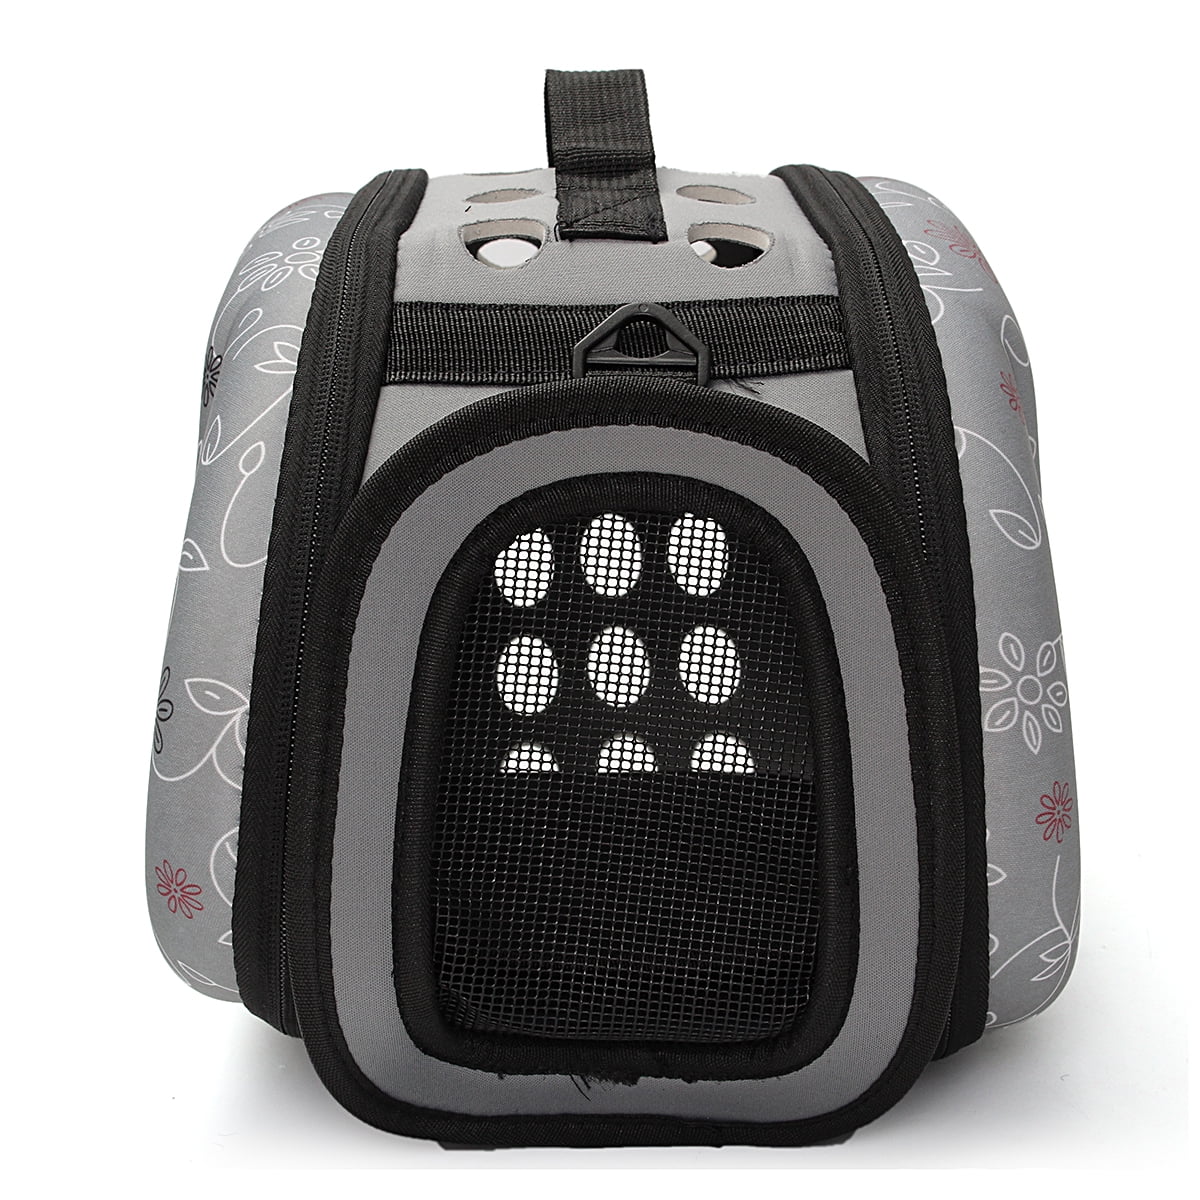 Pet Carriers For Dog & Cat，Portable Pet Small Dog Cat Sided Carrier Travel Tote Shoulder Bag ...